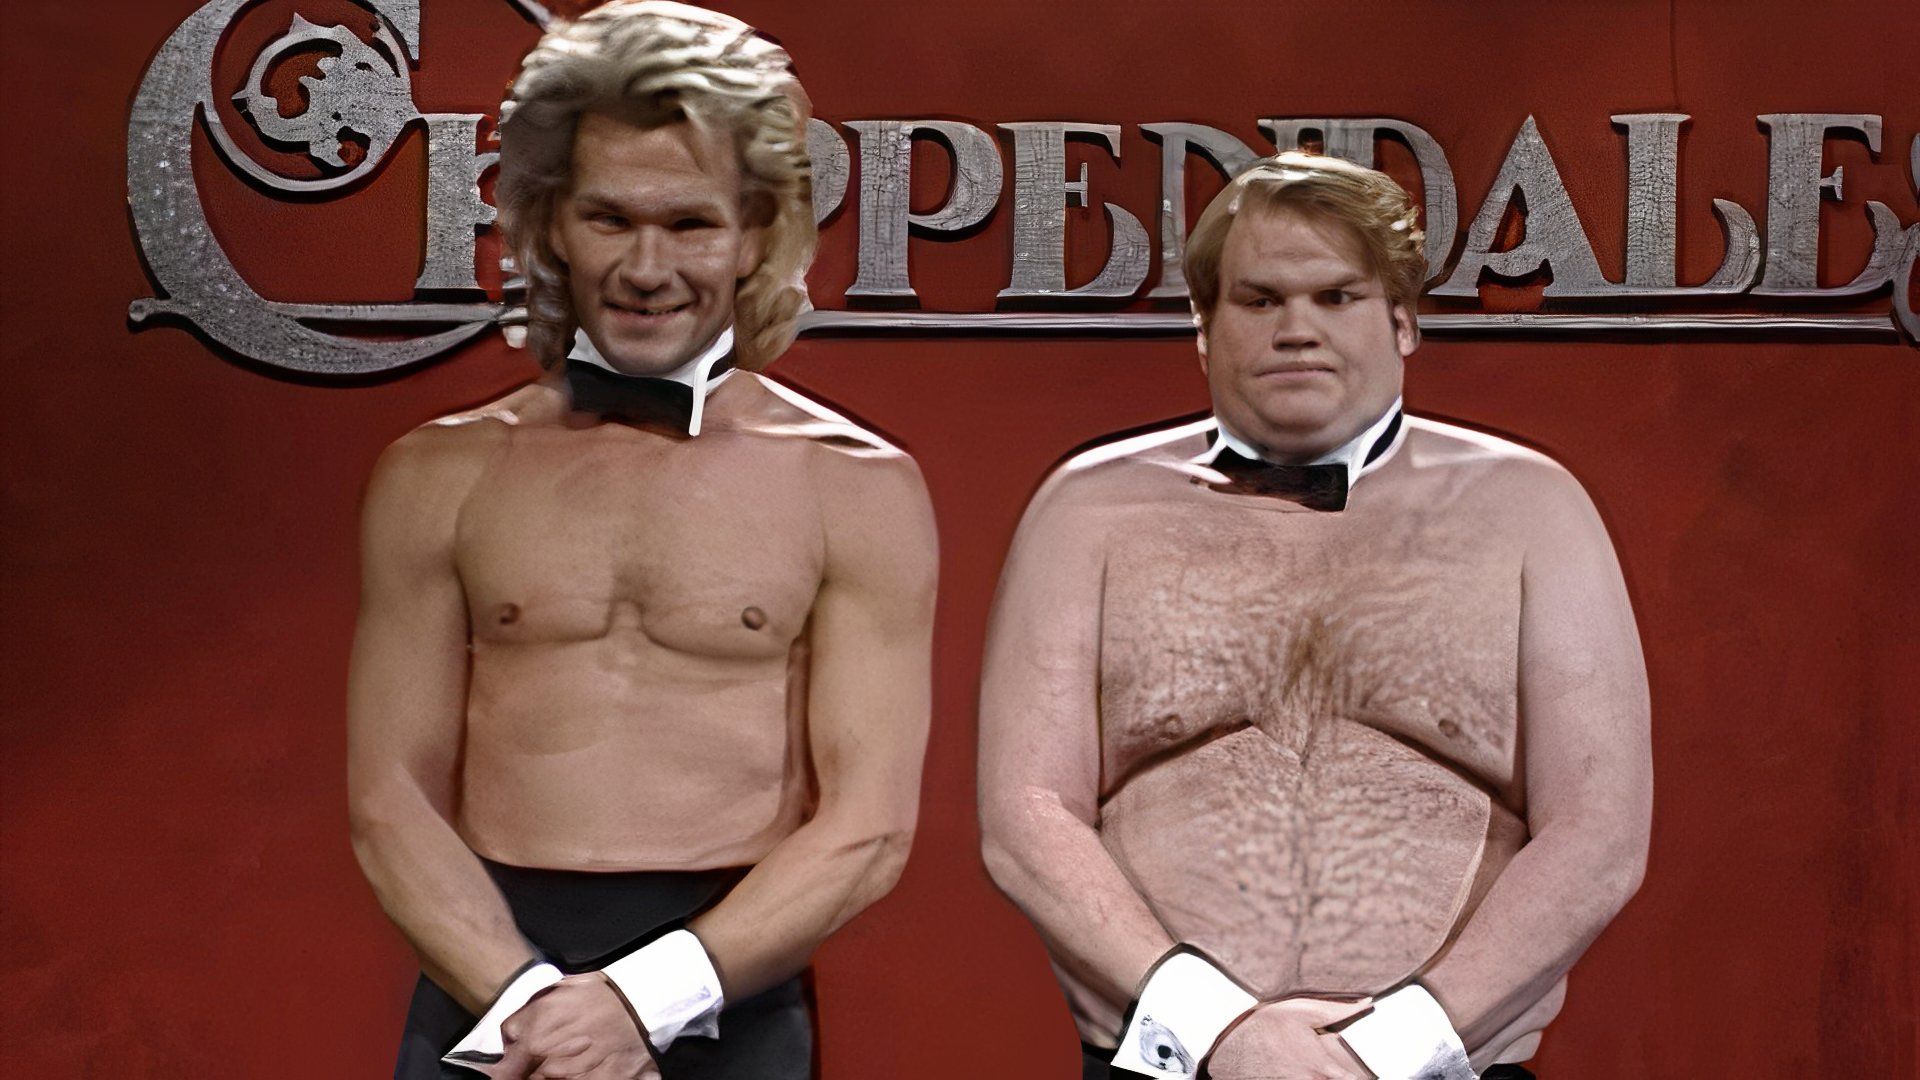 patrick swayze and chris farley in the sketch chippendale's audition of saturday Night Live